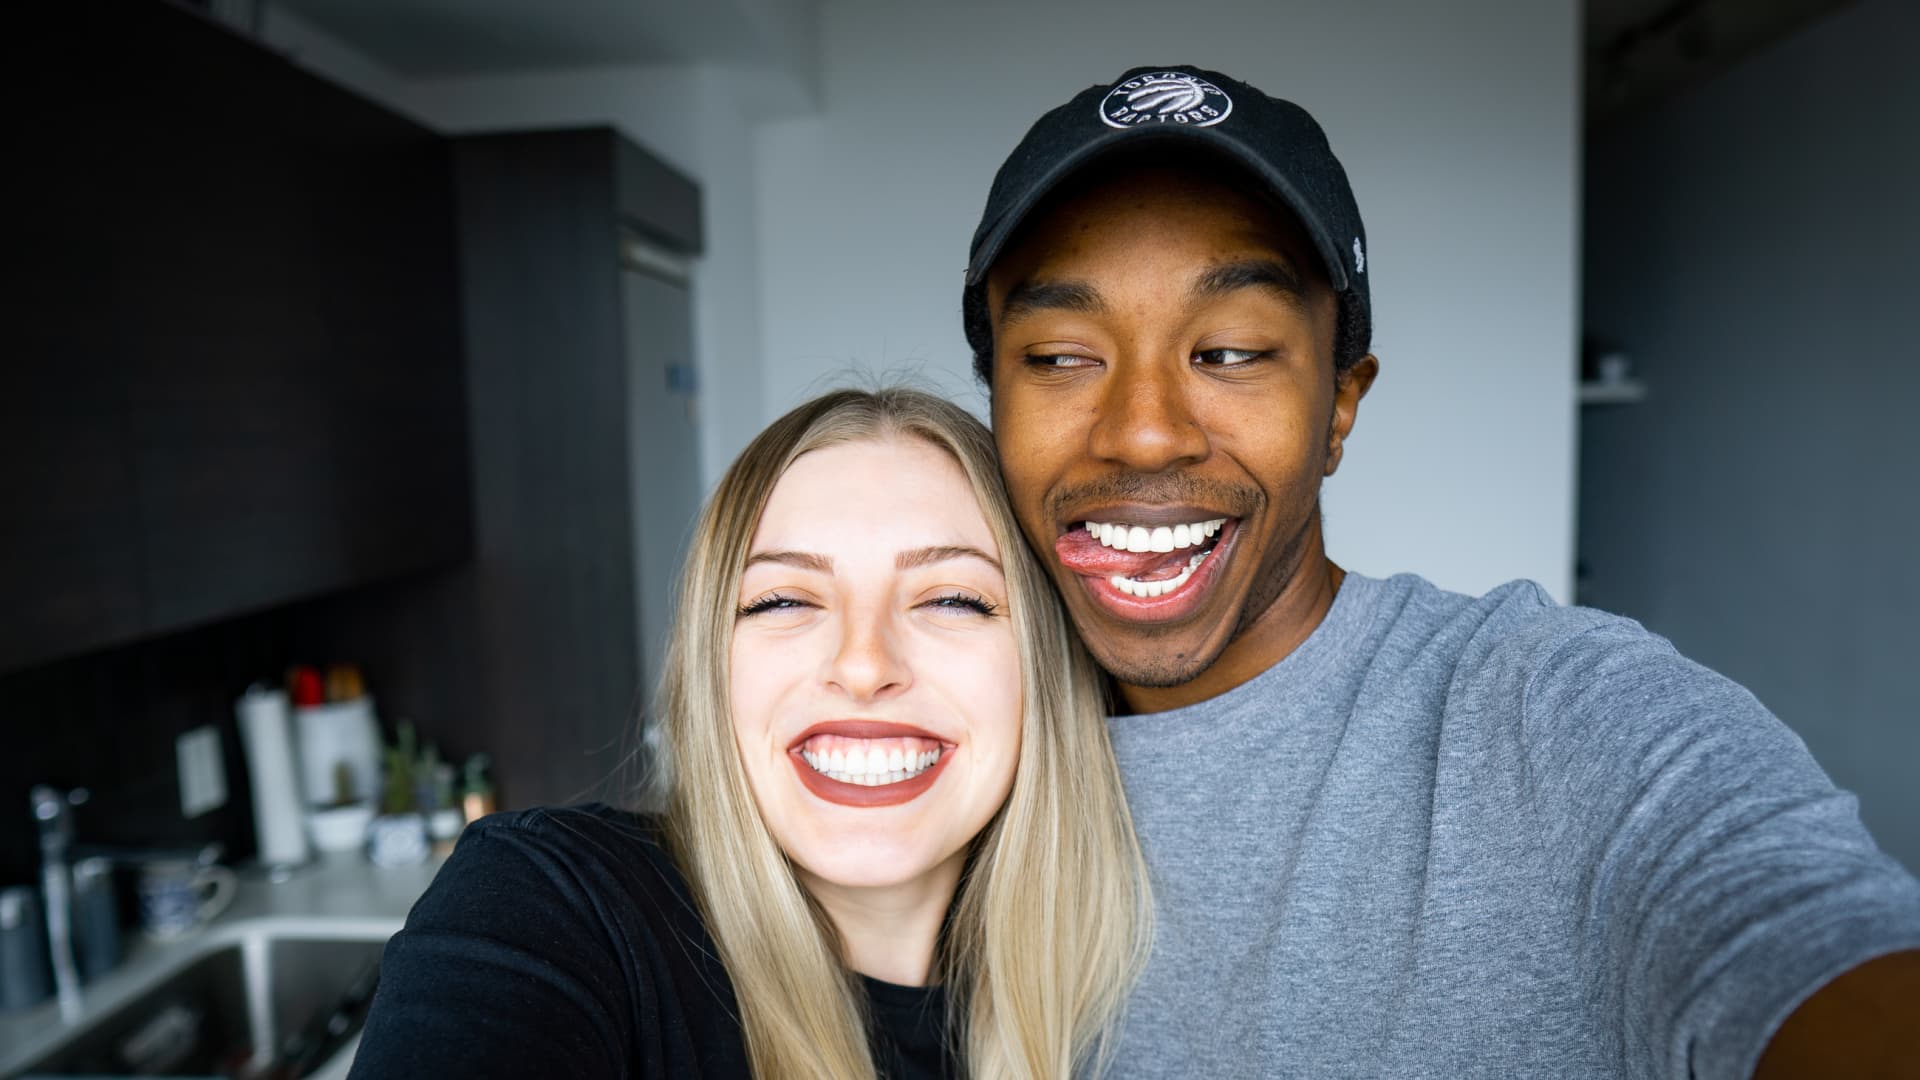 Steph and Den started their YouTube channel in August 2019.